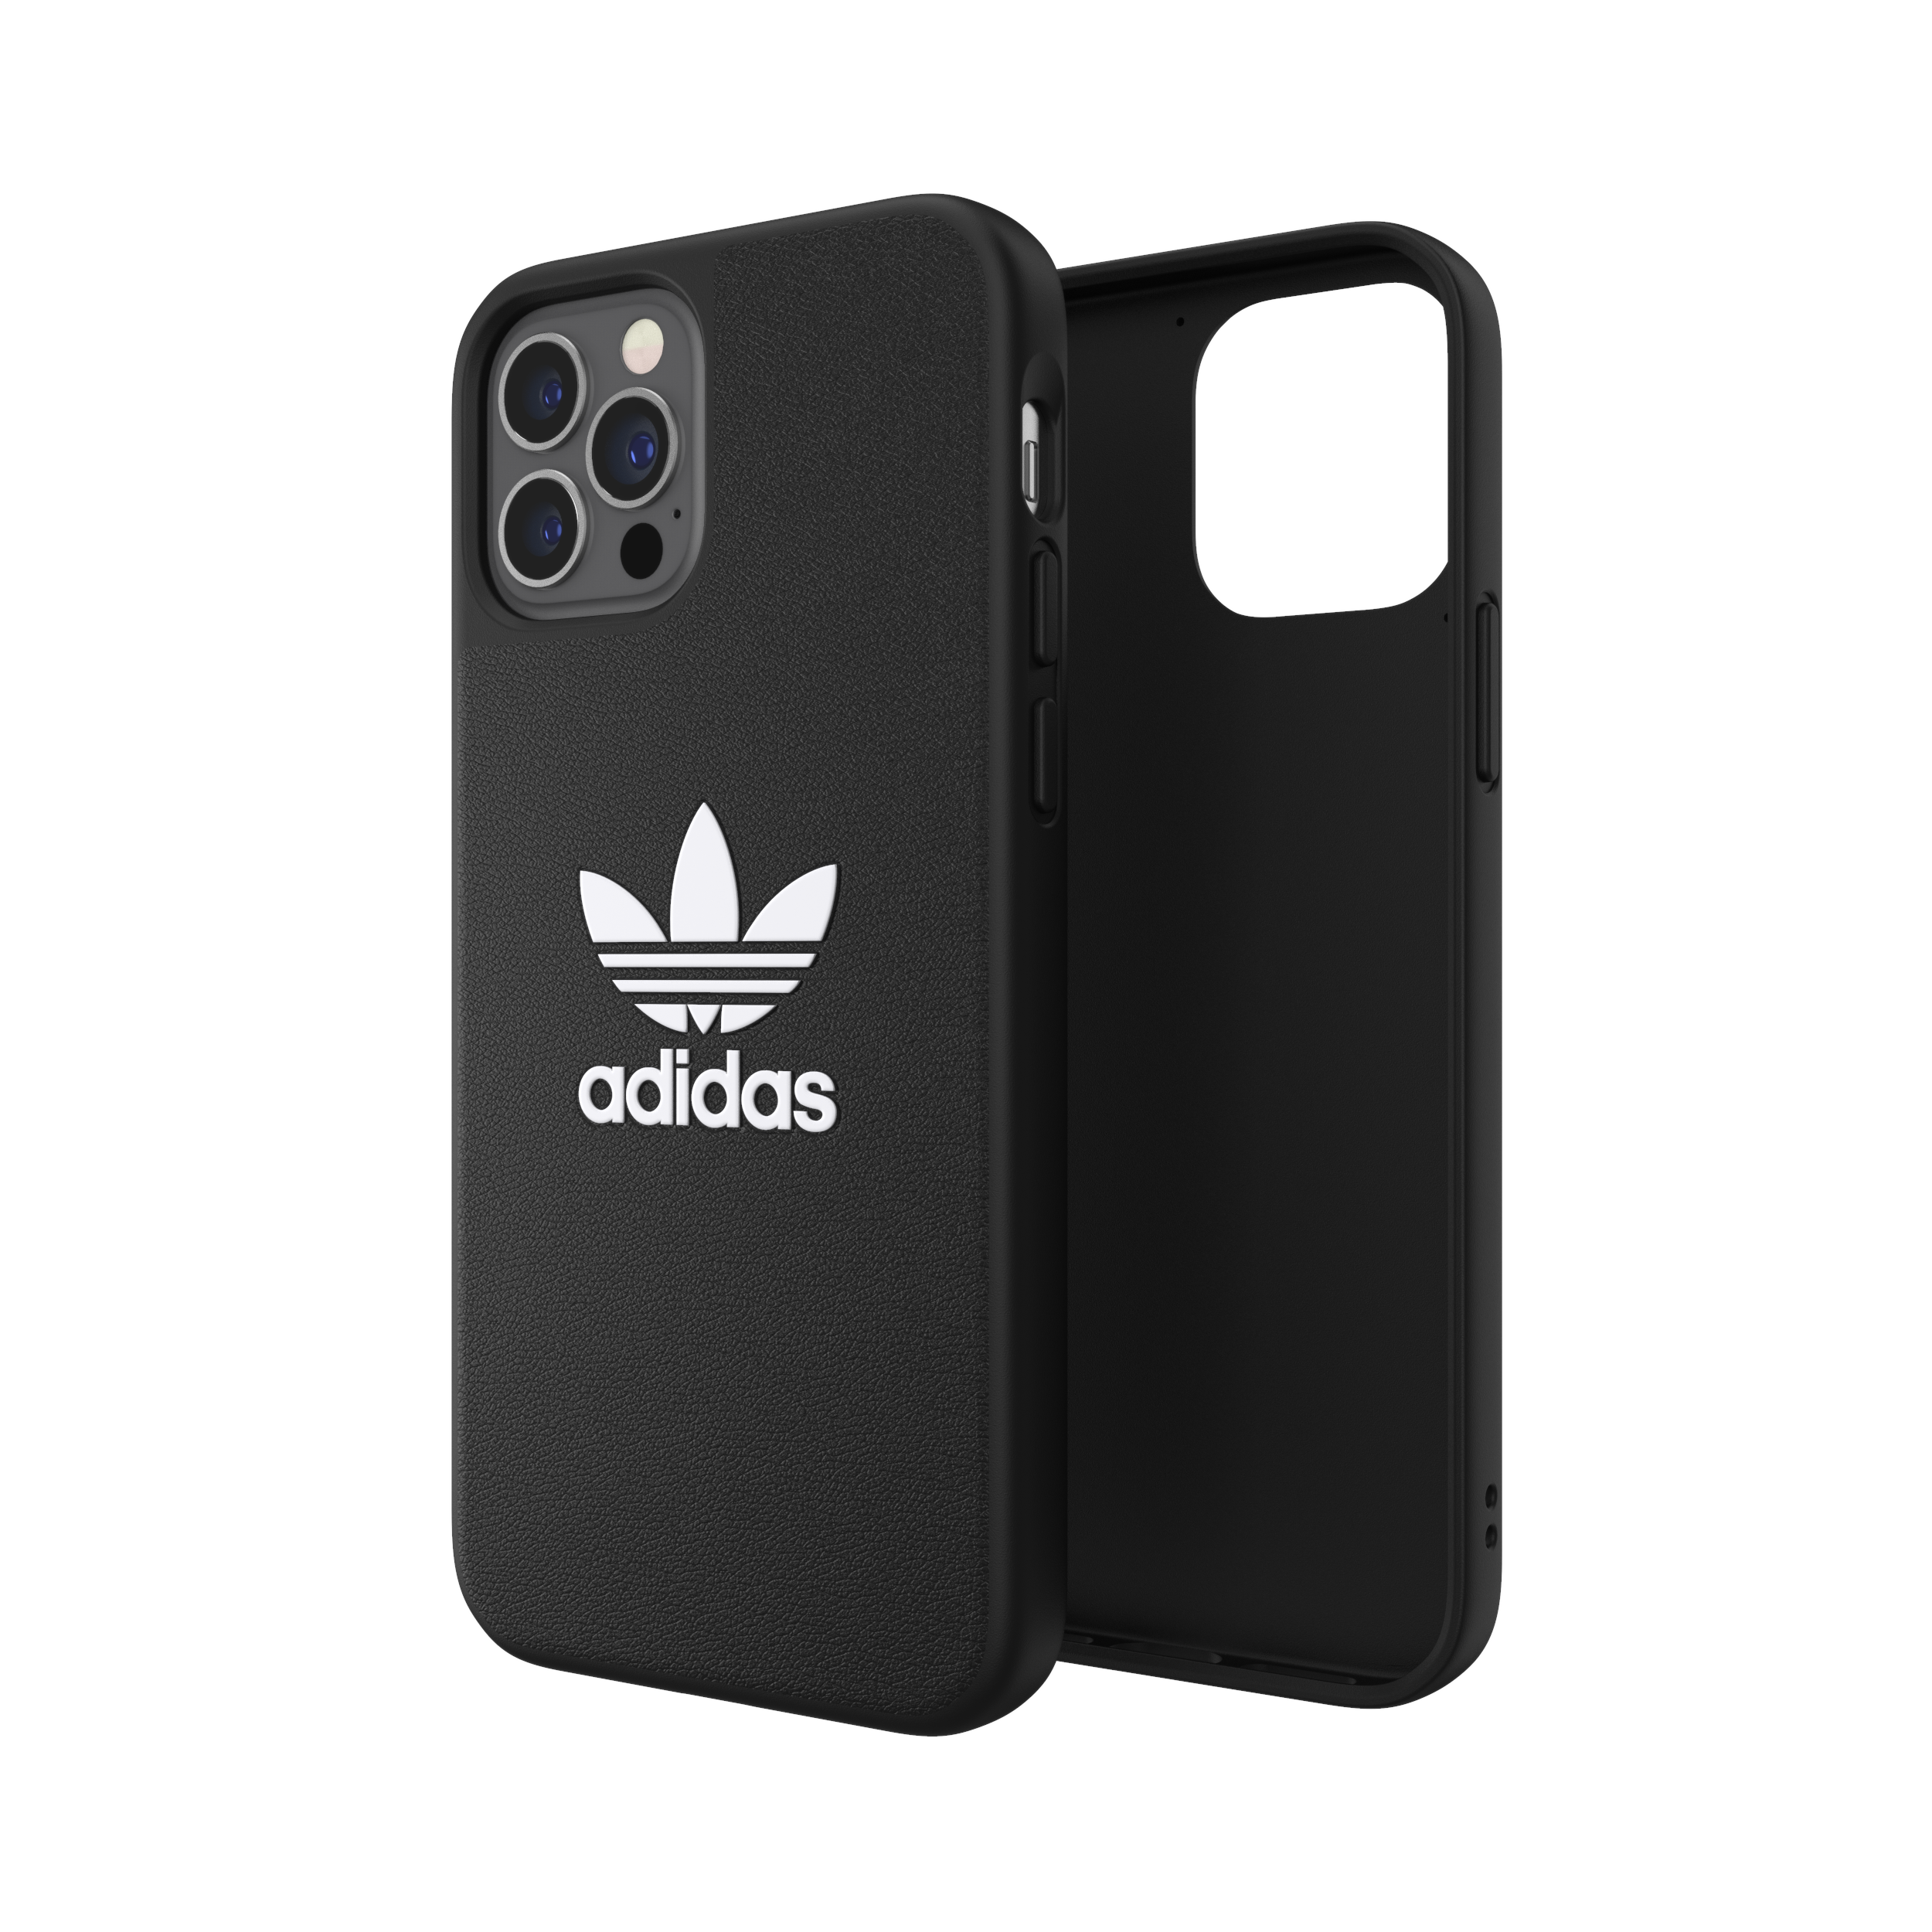 Adidas ORIGINALS Apple iPhone 12 / 12 Pro Basic Moulded Case - Back cover w/ Trefoil Design, Scratch & Drop Protection w/ TPU Bumper, Wireless Charging Compatible - Black/White